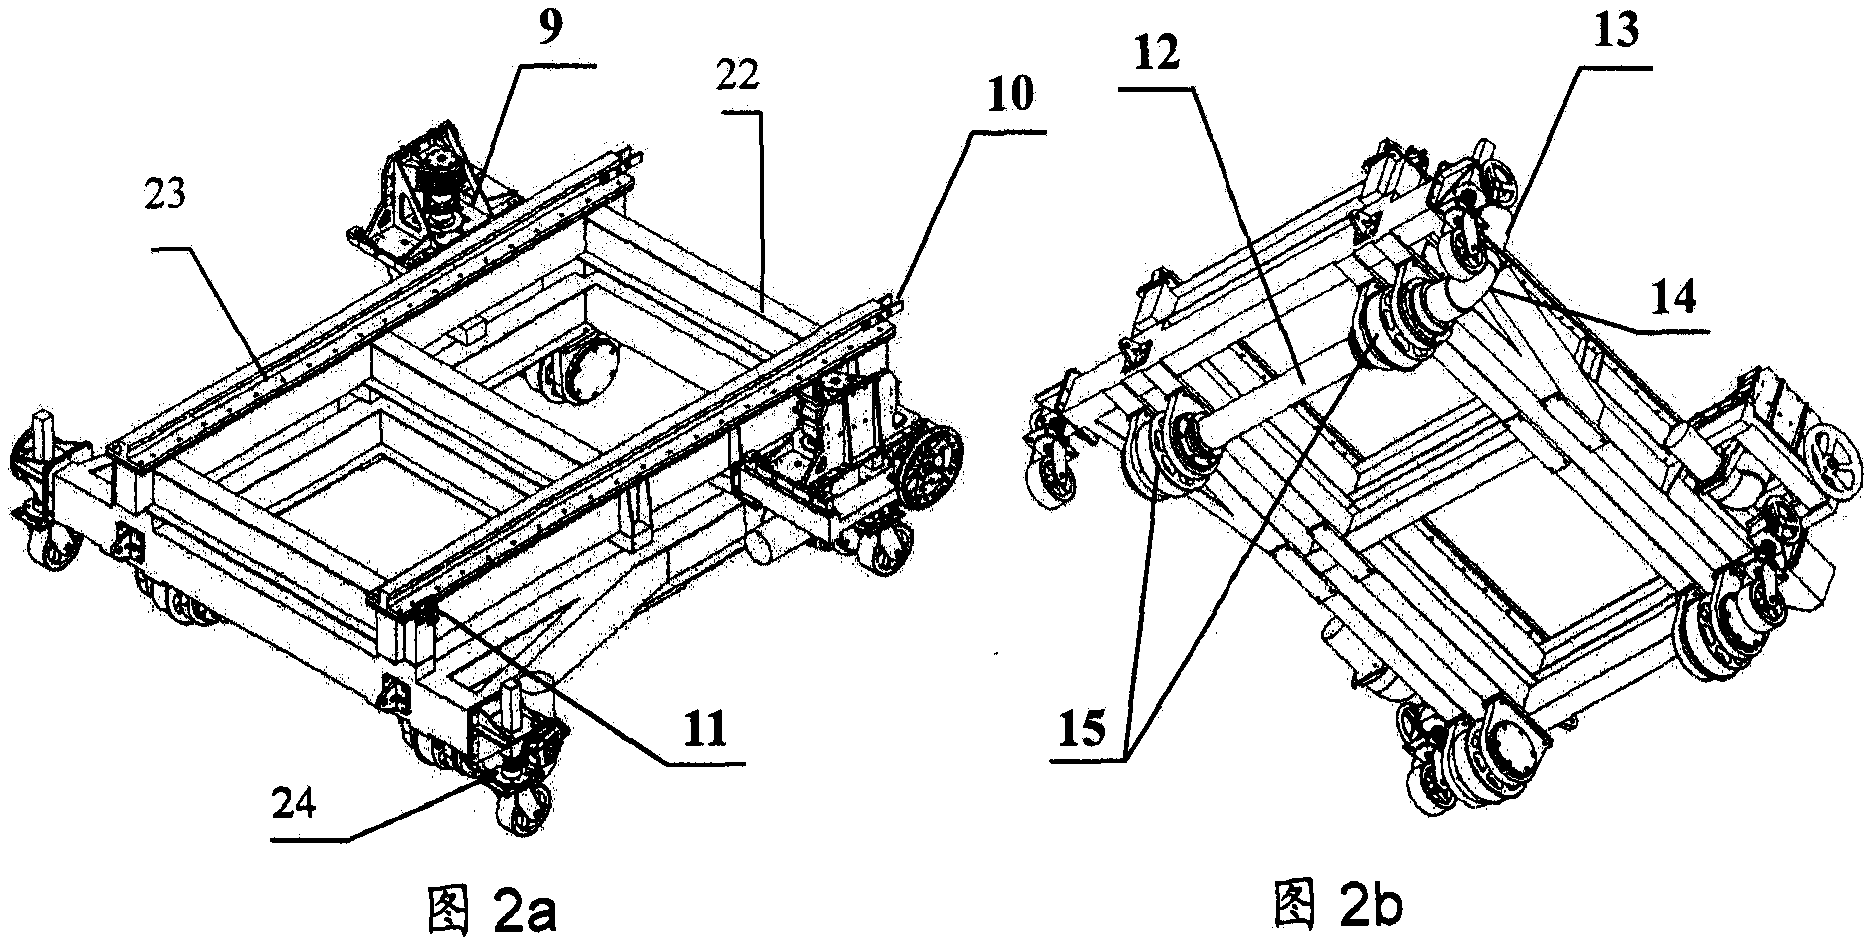 A device and method for transfer, docking and transfer positioning of a spacecraft inside and outside a space environment container cabin